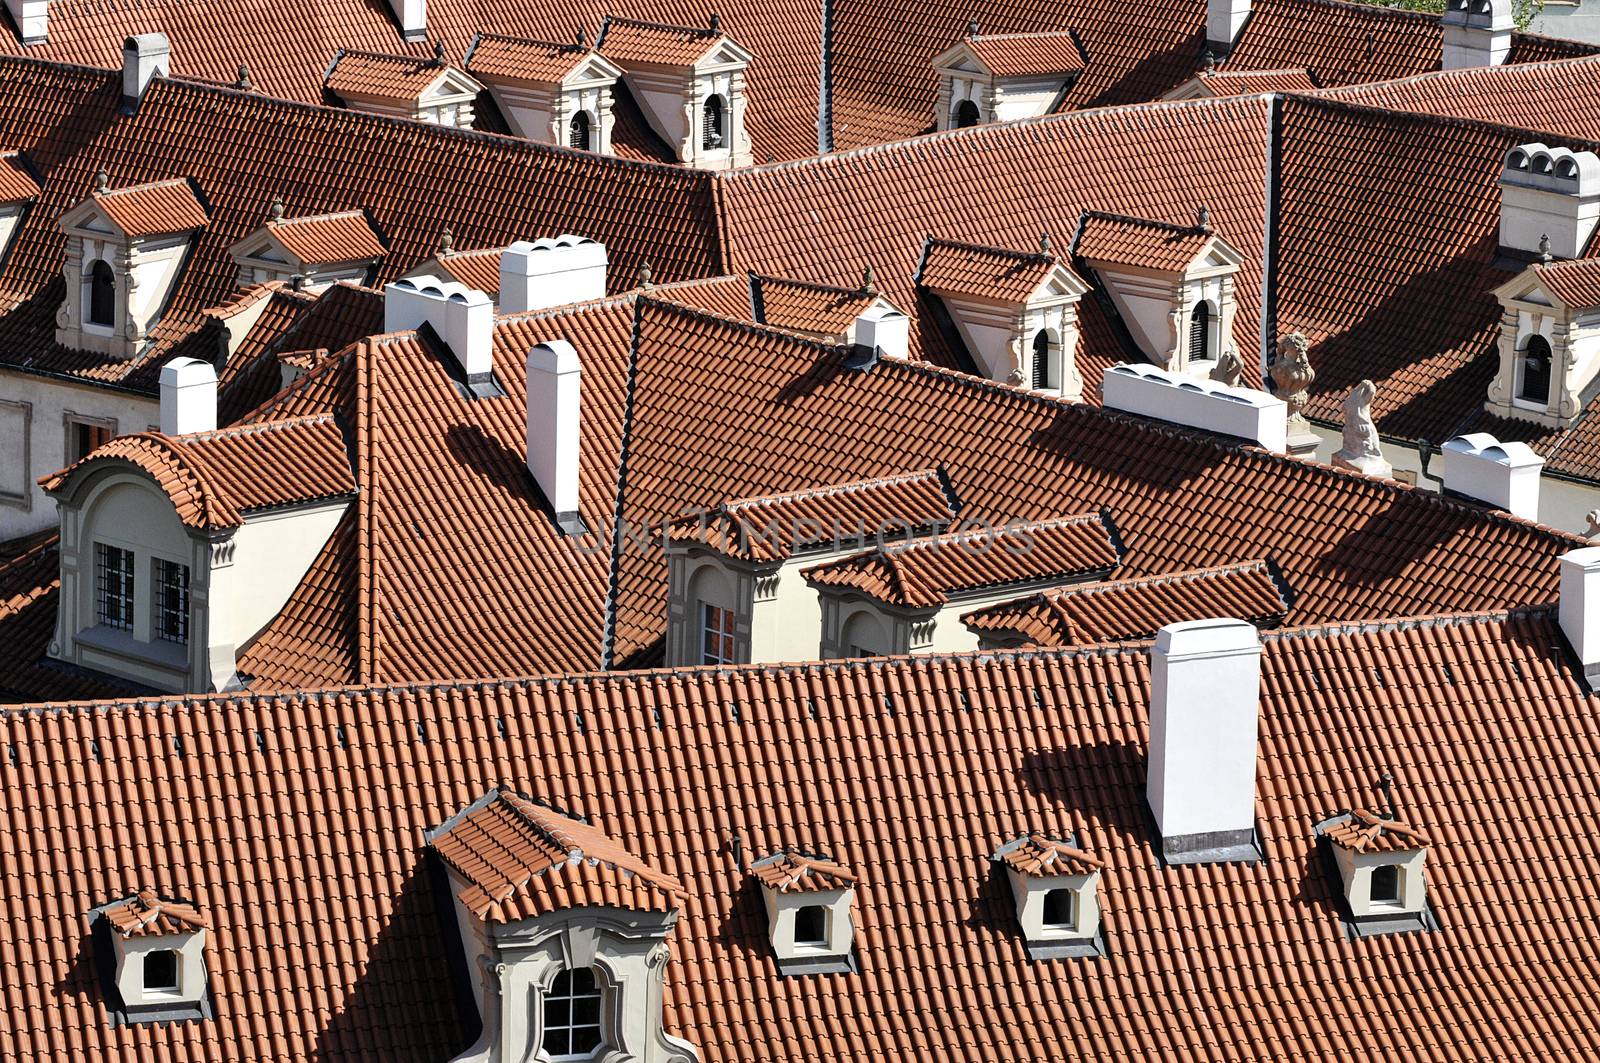 Roofs of old Prague houses covered with shingles